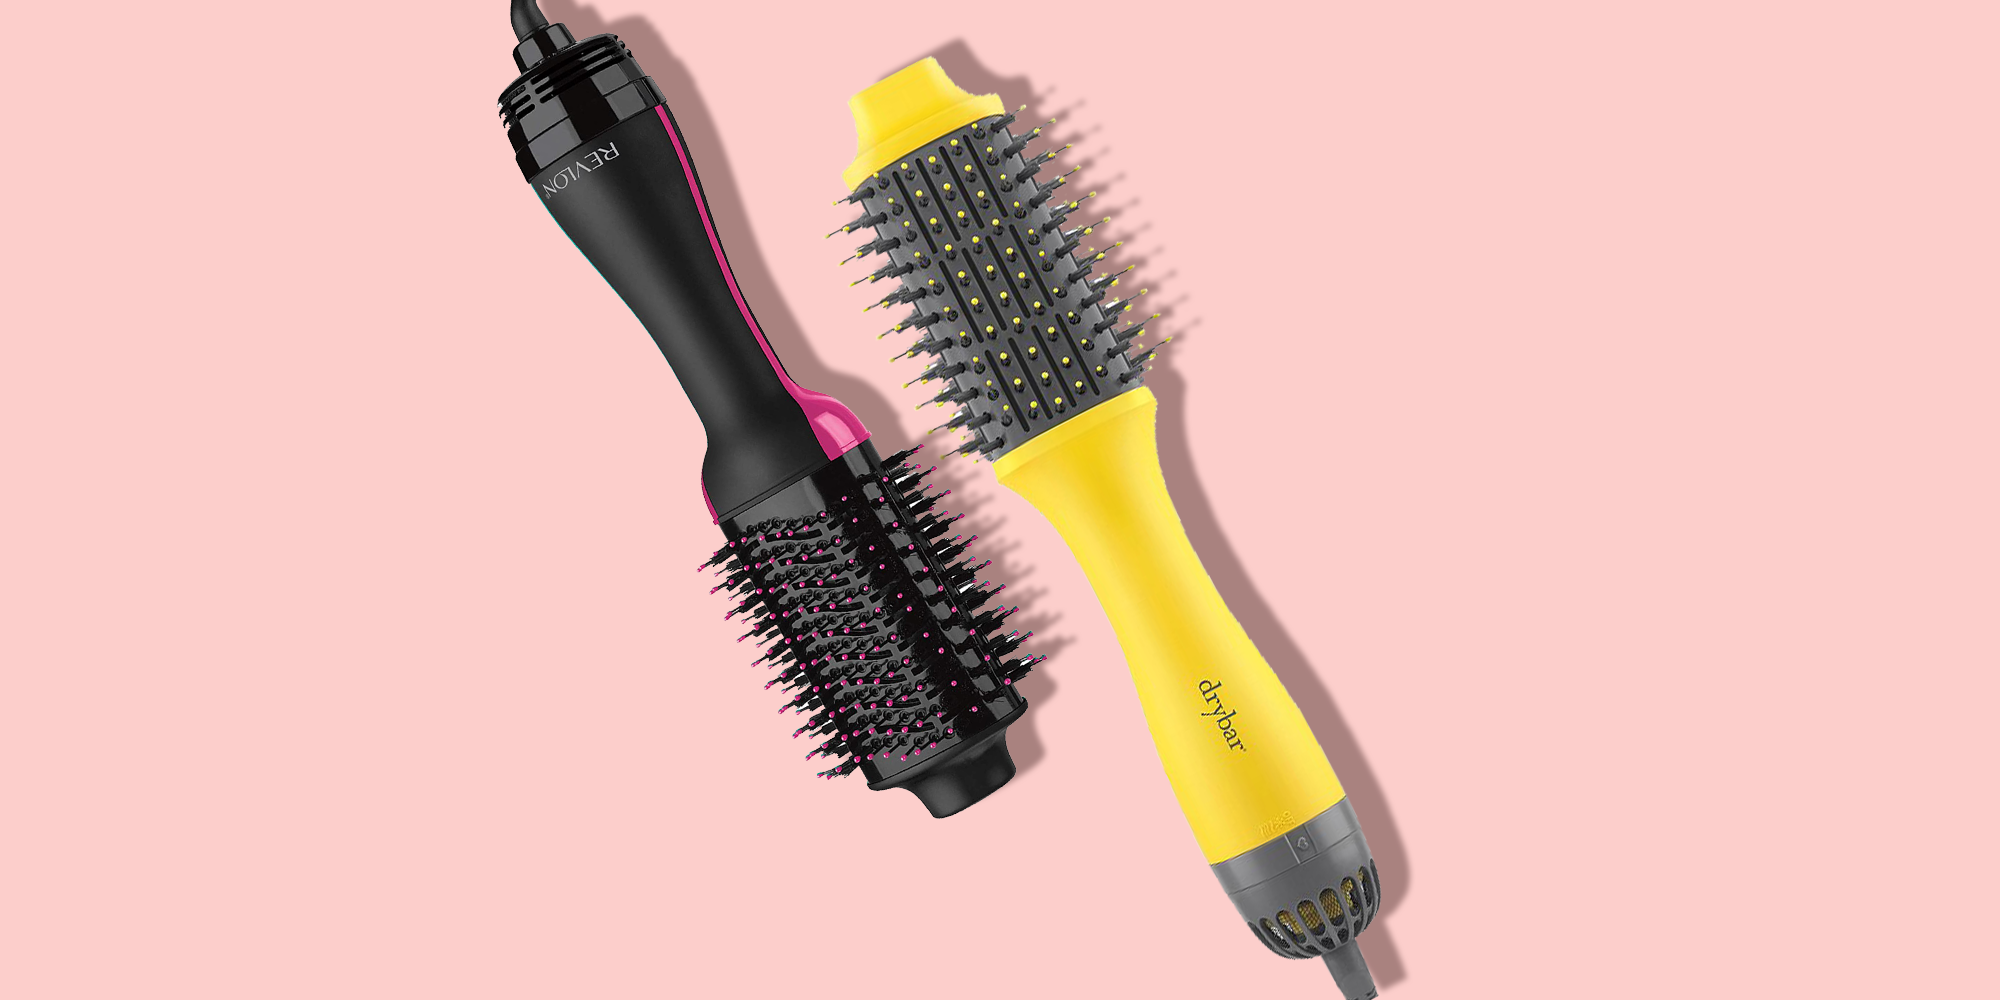 7 Best Hair Dryer Brushes of 2022 - Top Hot Air Brushes